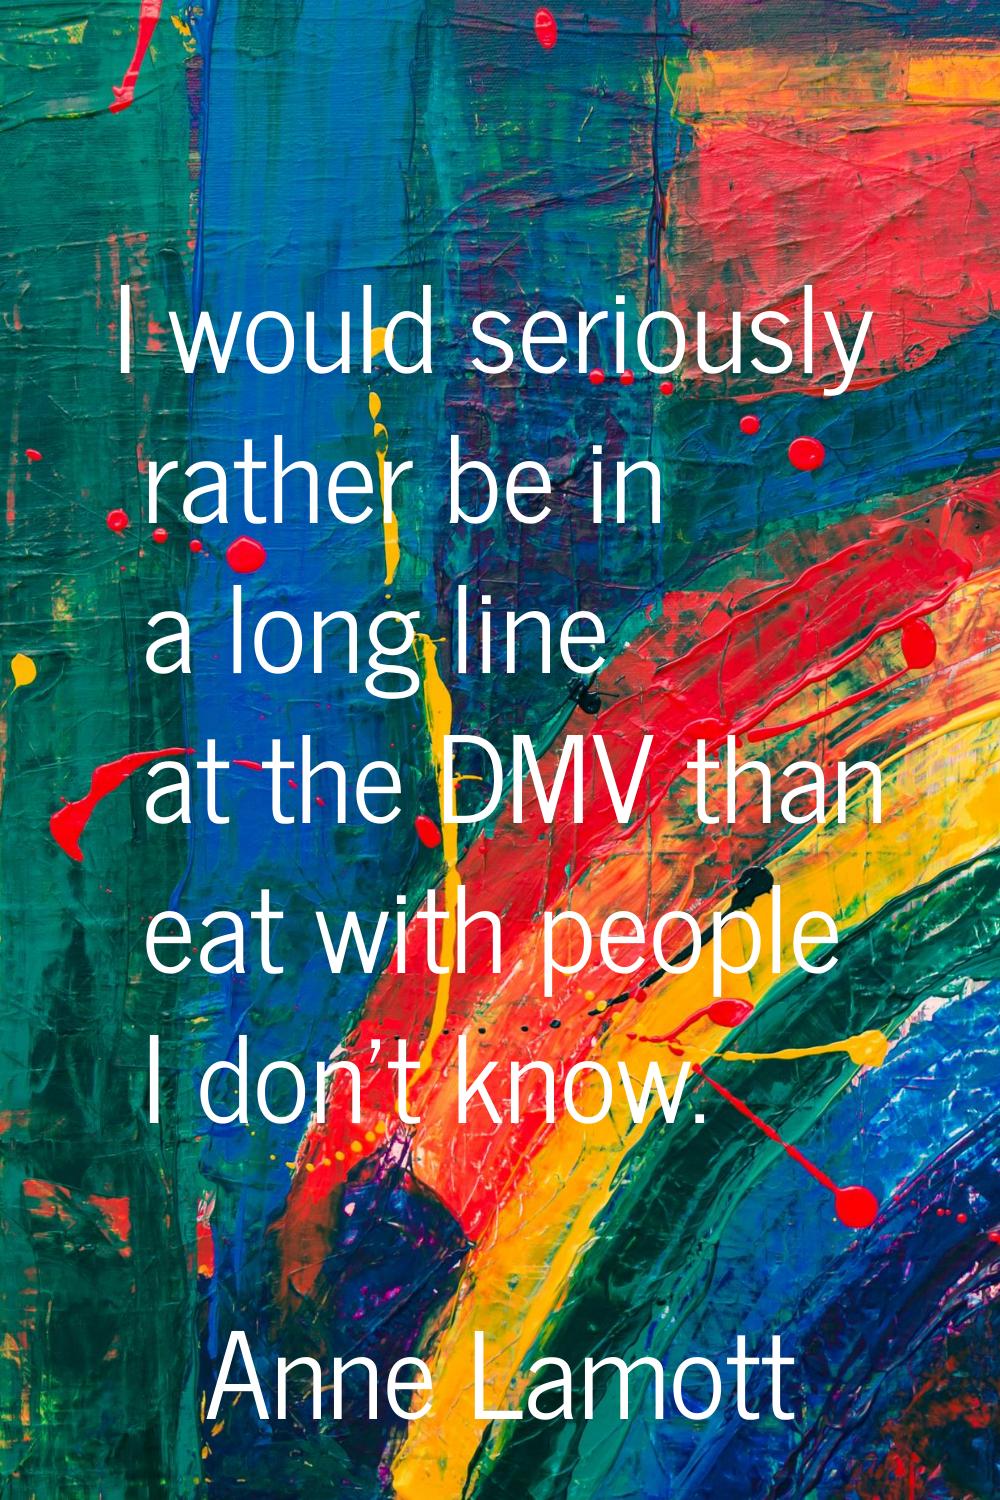 I would seriously rather be in a long line at the DMV than eat with people I don't know.